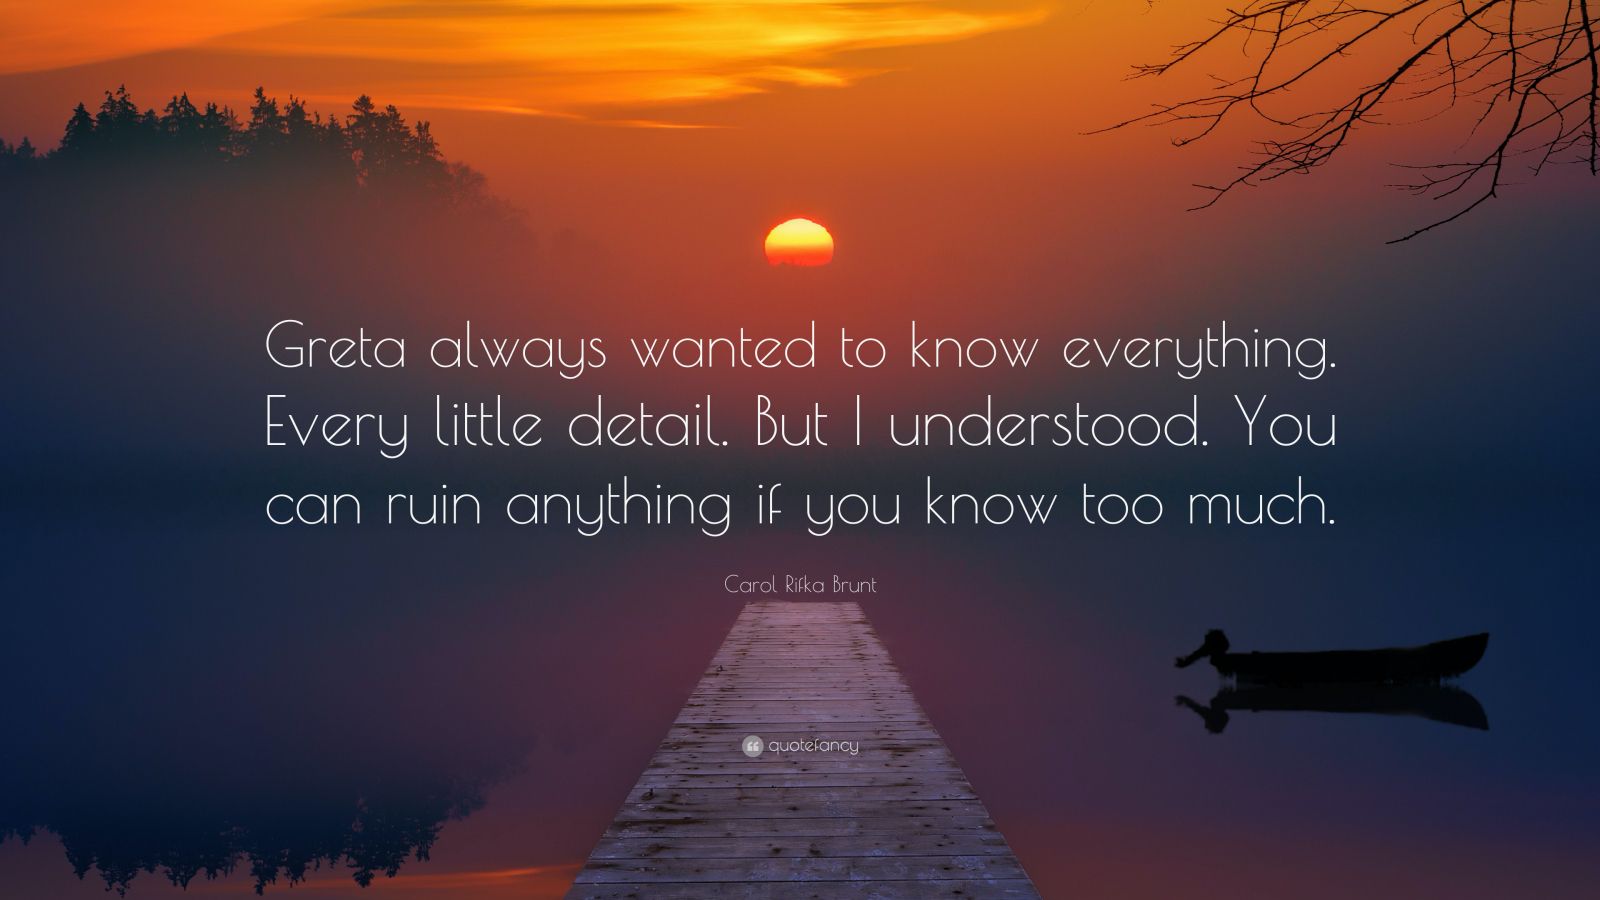 Carol Rifka Brunt Quote: “Greta always wanted to know everything. Every ...